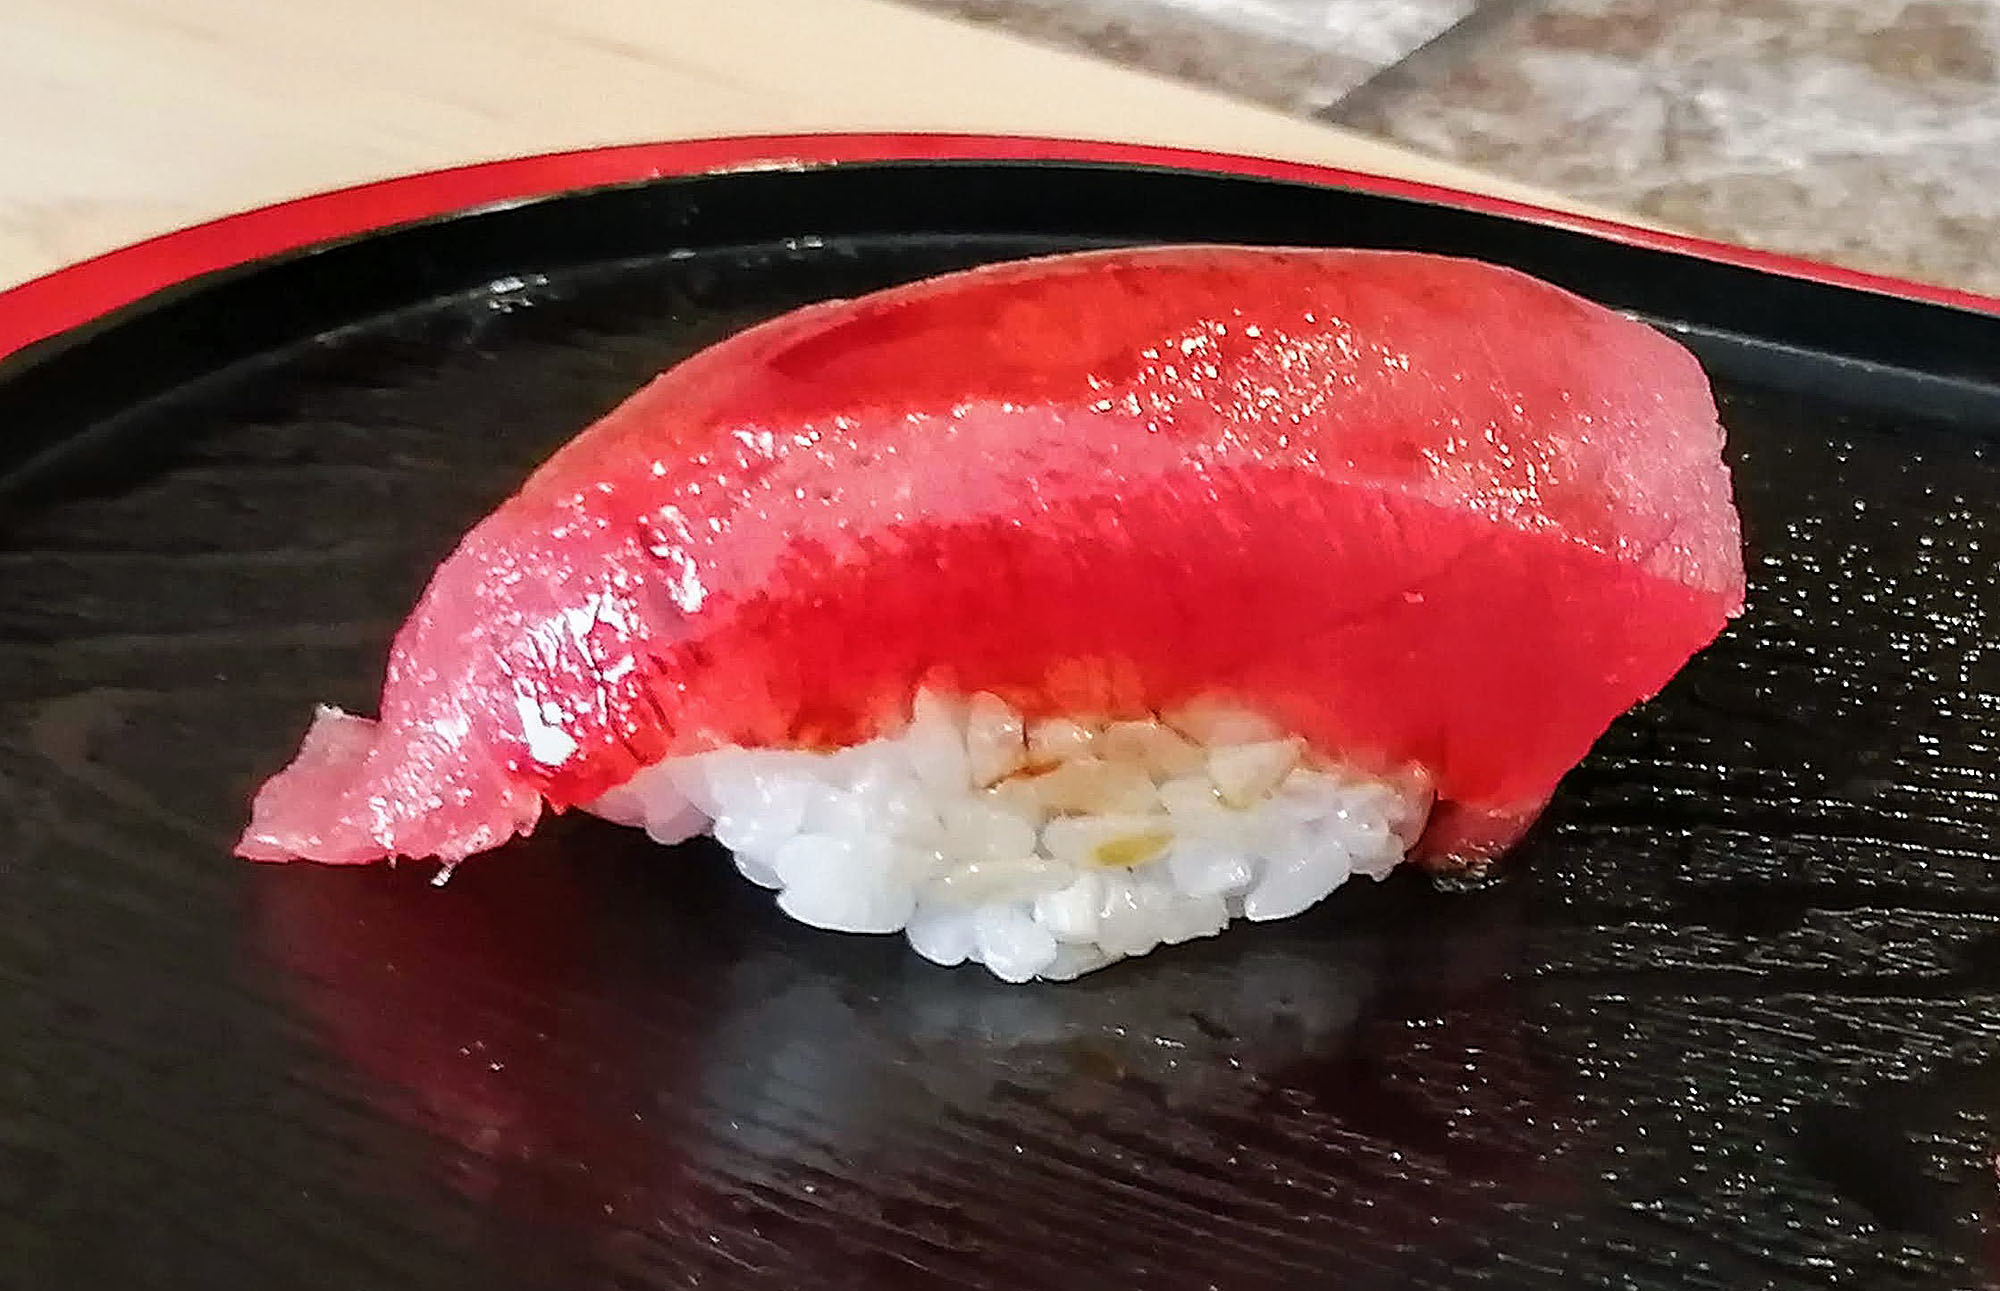 A close-up of a piece of nigiri sushi made with bright red raw tuna sitting on a black plate. Photo by Paul Young.